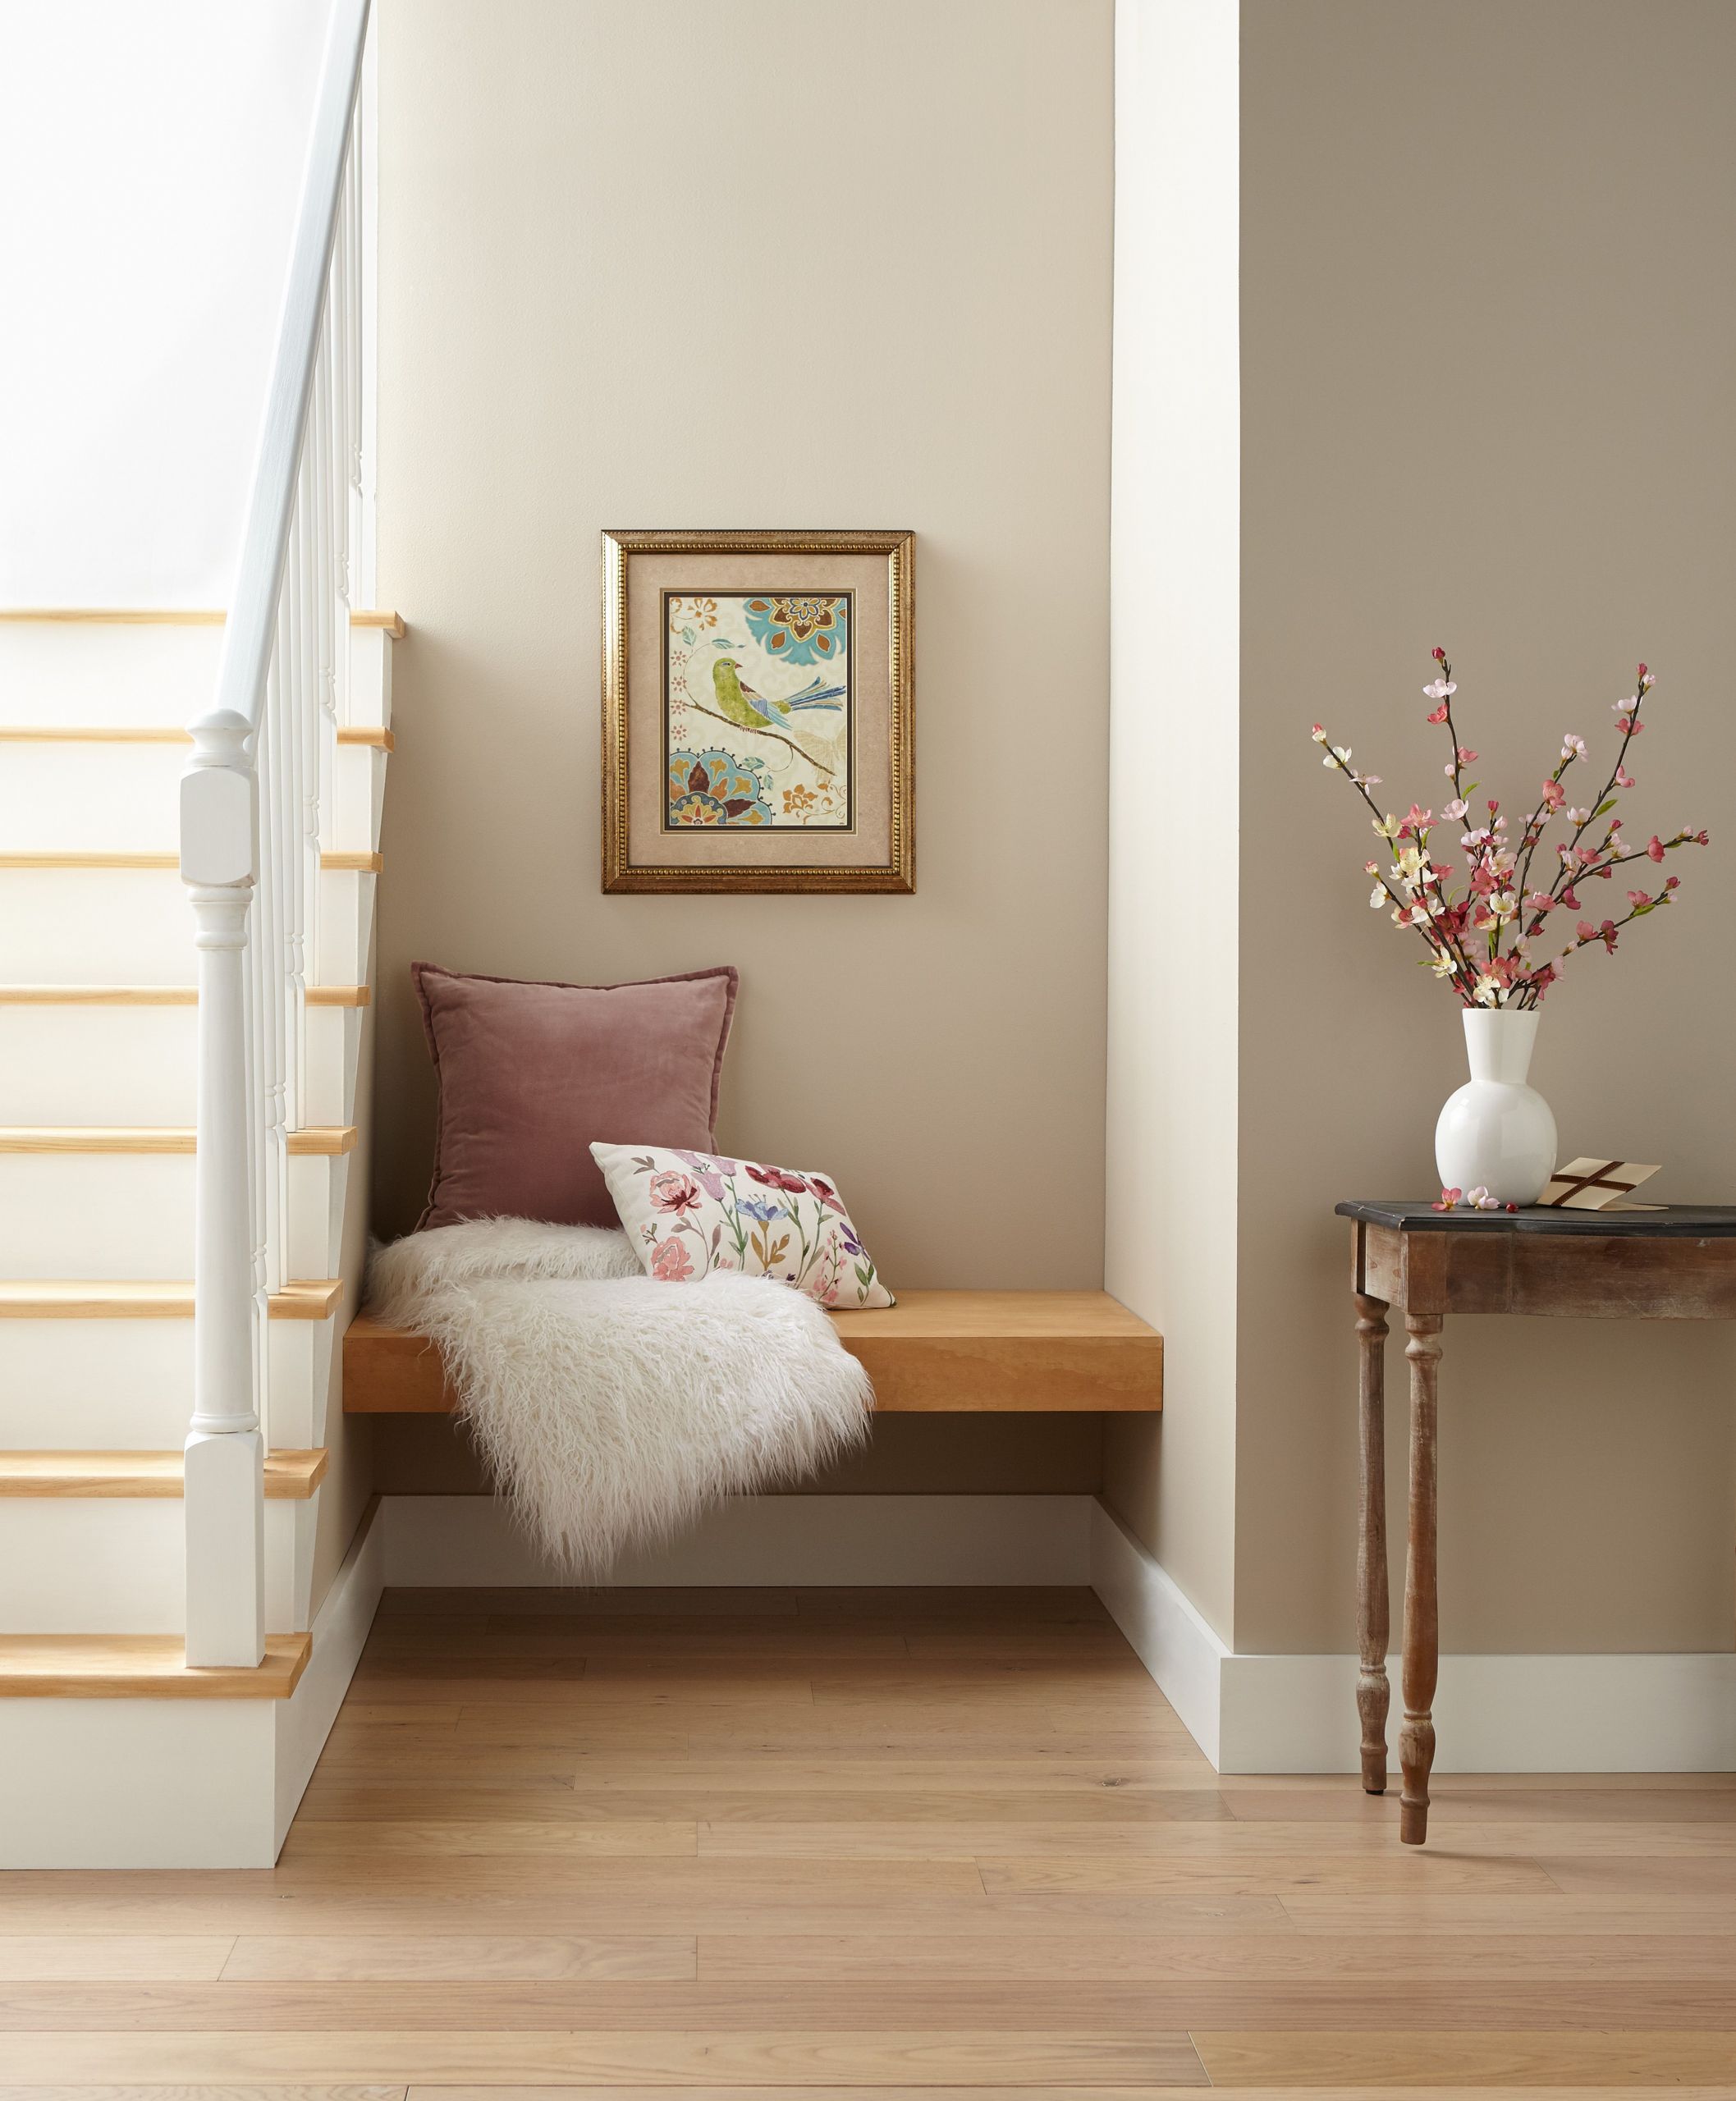 Living Paint Colors
 These Are the Paint Color Trends for 2020 According to Behr